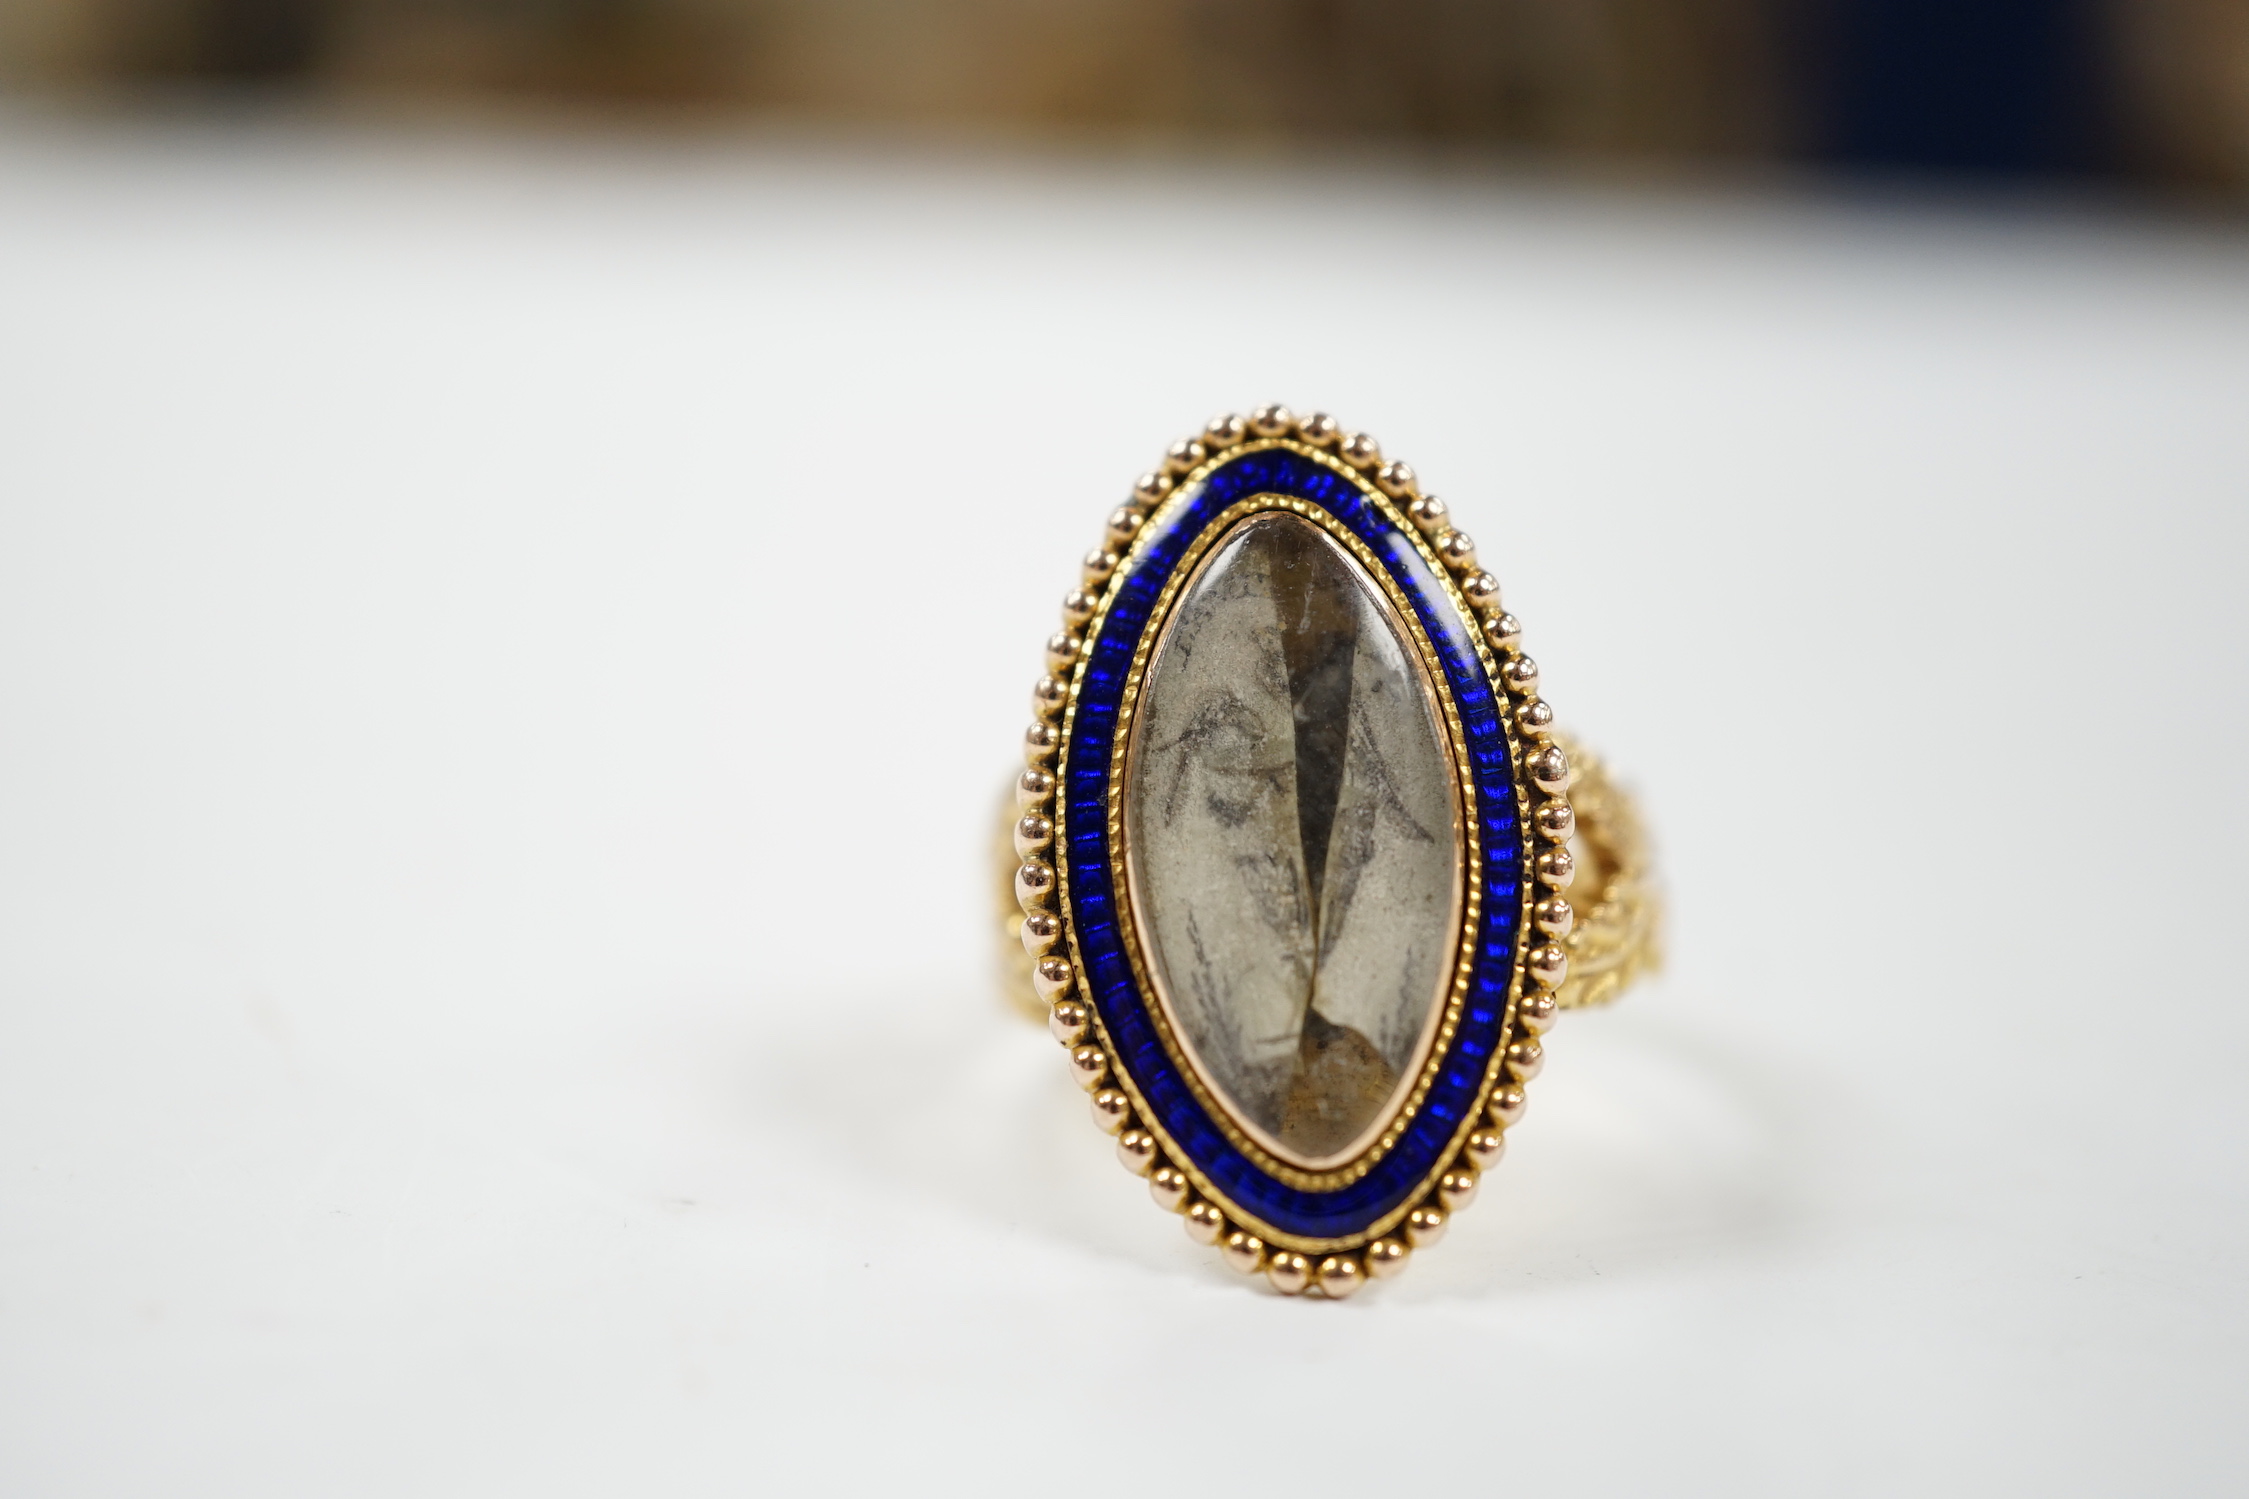 A 19th century 15ct and blue enamel set navette shaped mourning ring, with damaged inset ivory panel, size O, gross weight 5.5 grams. Submission reference Q8ZGC6ZR